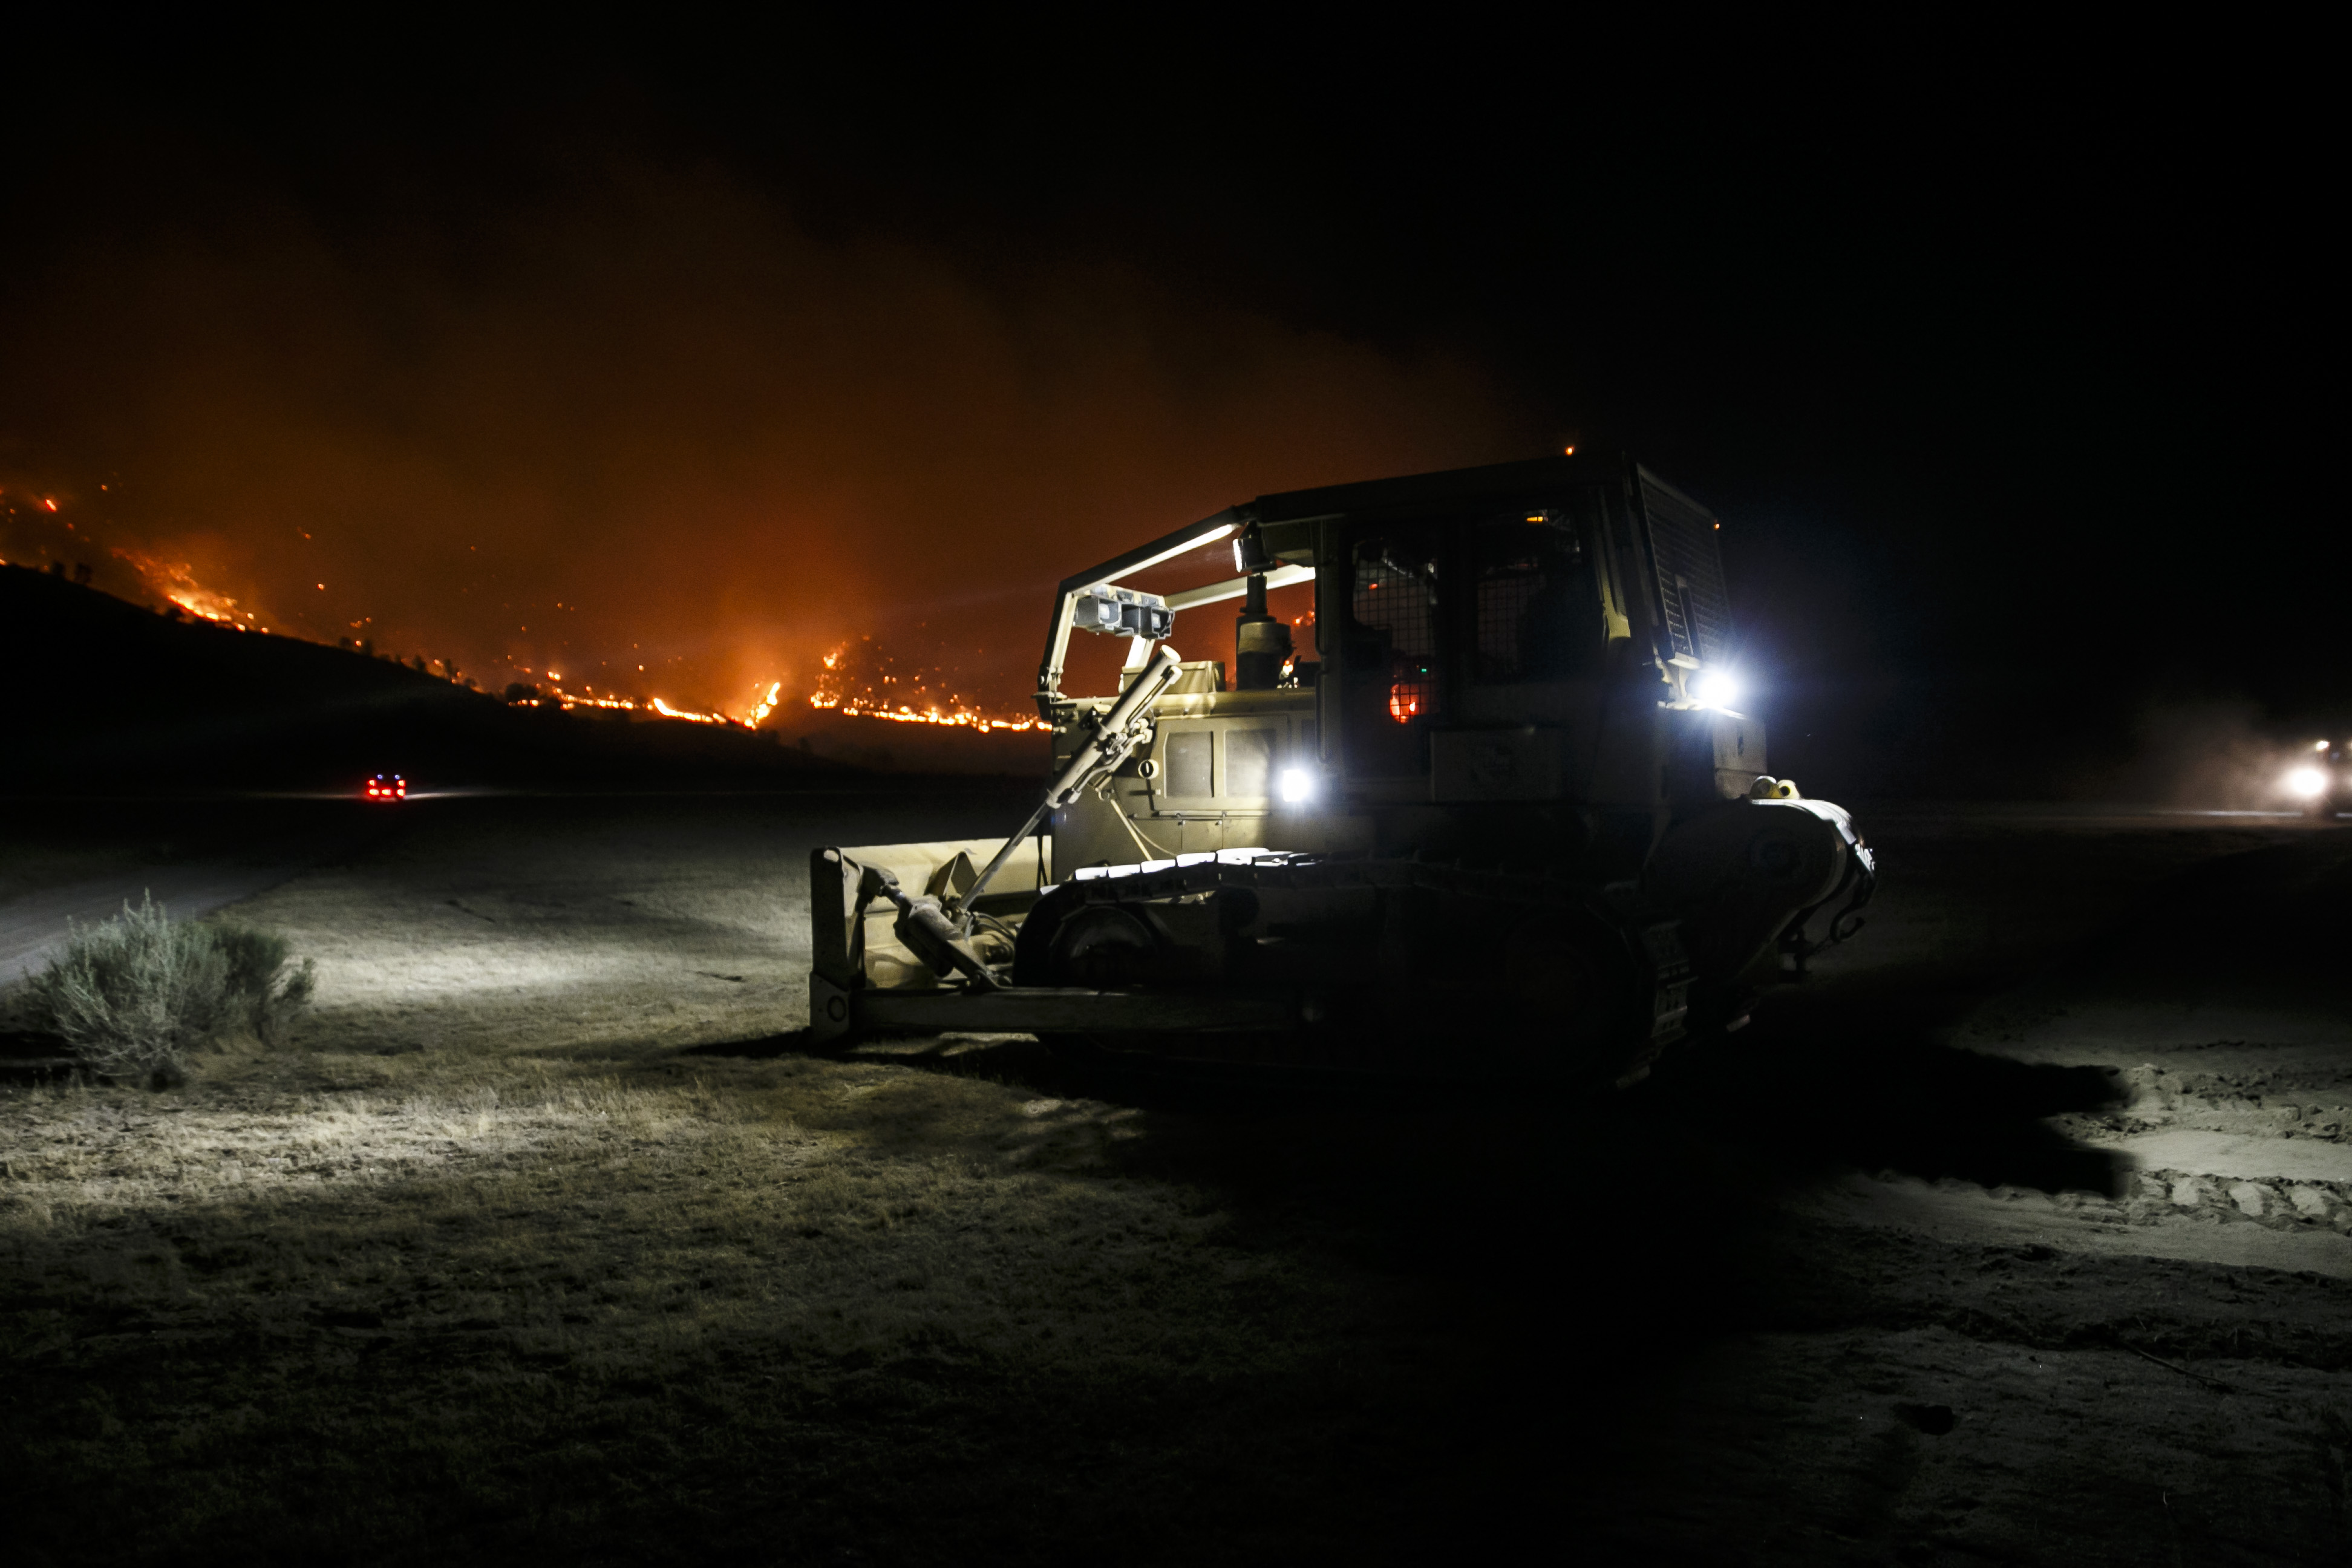 Bulldozers clear a fire break in Kelso Valley, at the head of the wildfire, near Lake Isabella, Calif., on June 24, 2016. (Marcus Yam&mdash;LA Times via Getty Images)